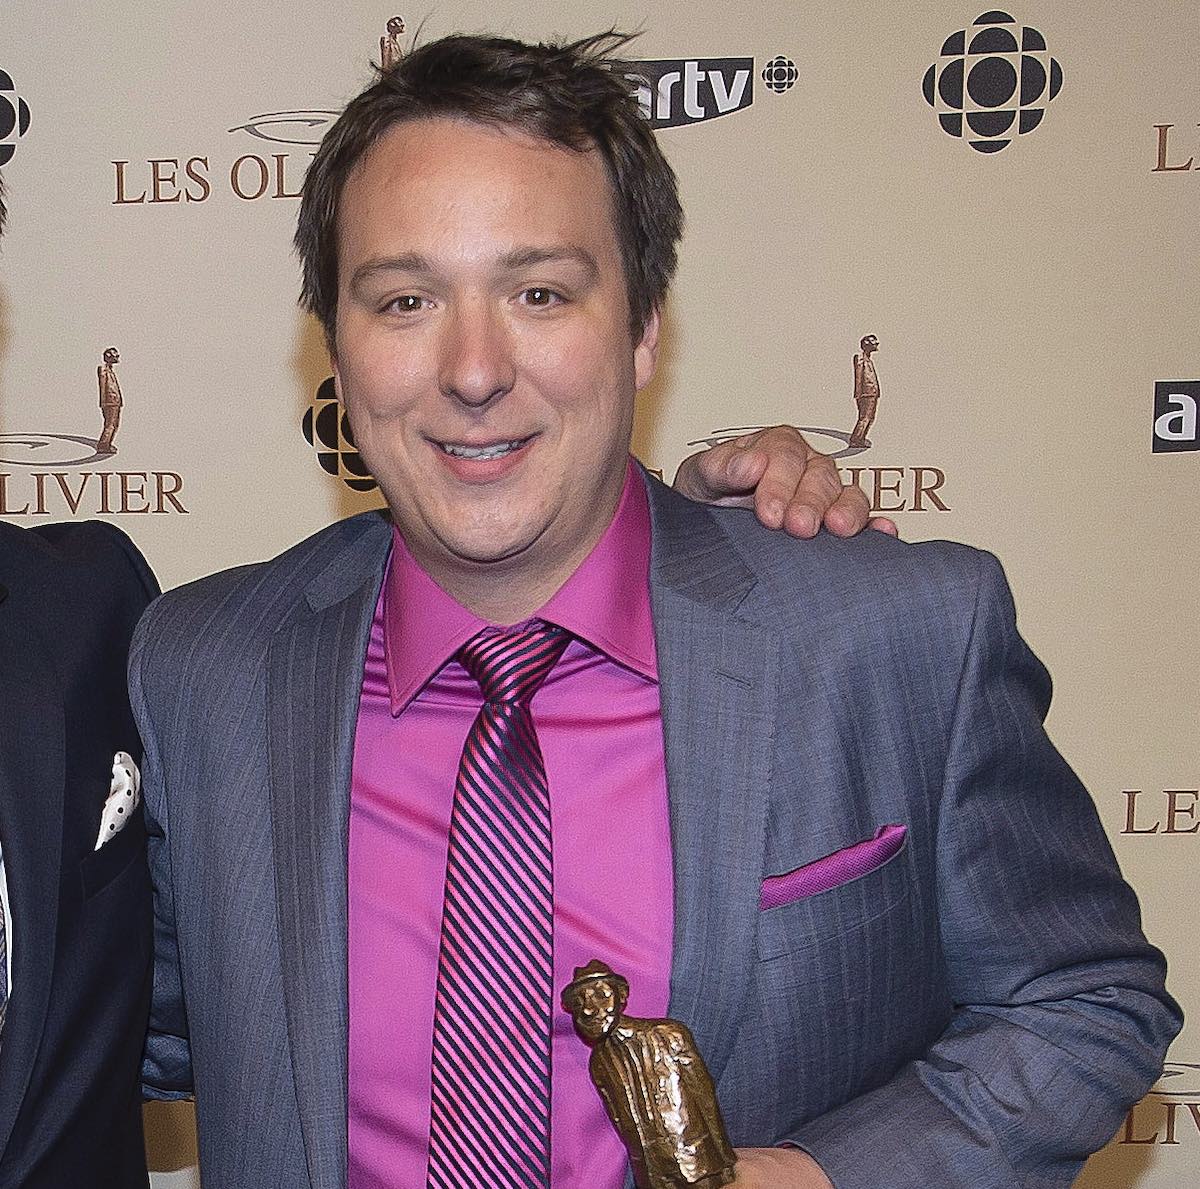 Gala des Olivier host Mario Jean, left, poses with Mise en scène catagory winner Pierre-Francois Legendre, right, at the annual Gala des Oliver in Montreal Sunday, May 12, 2013. THE CANADIAN PRESS/Peter McCabe